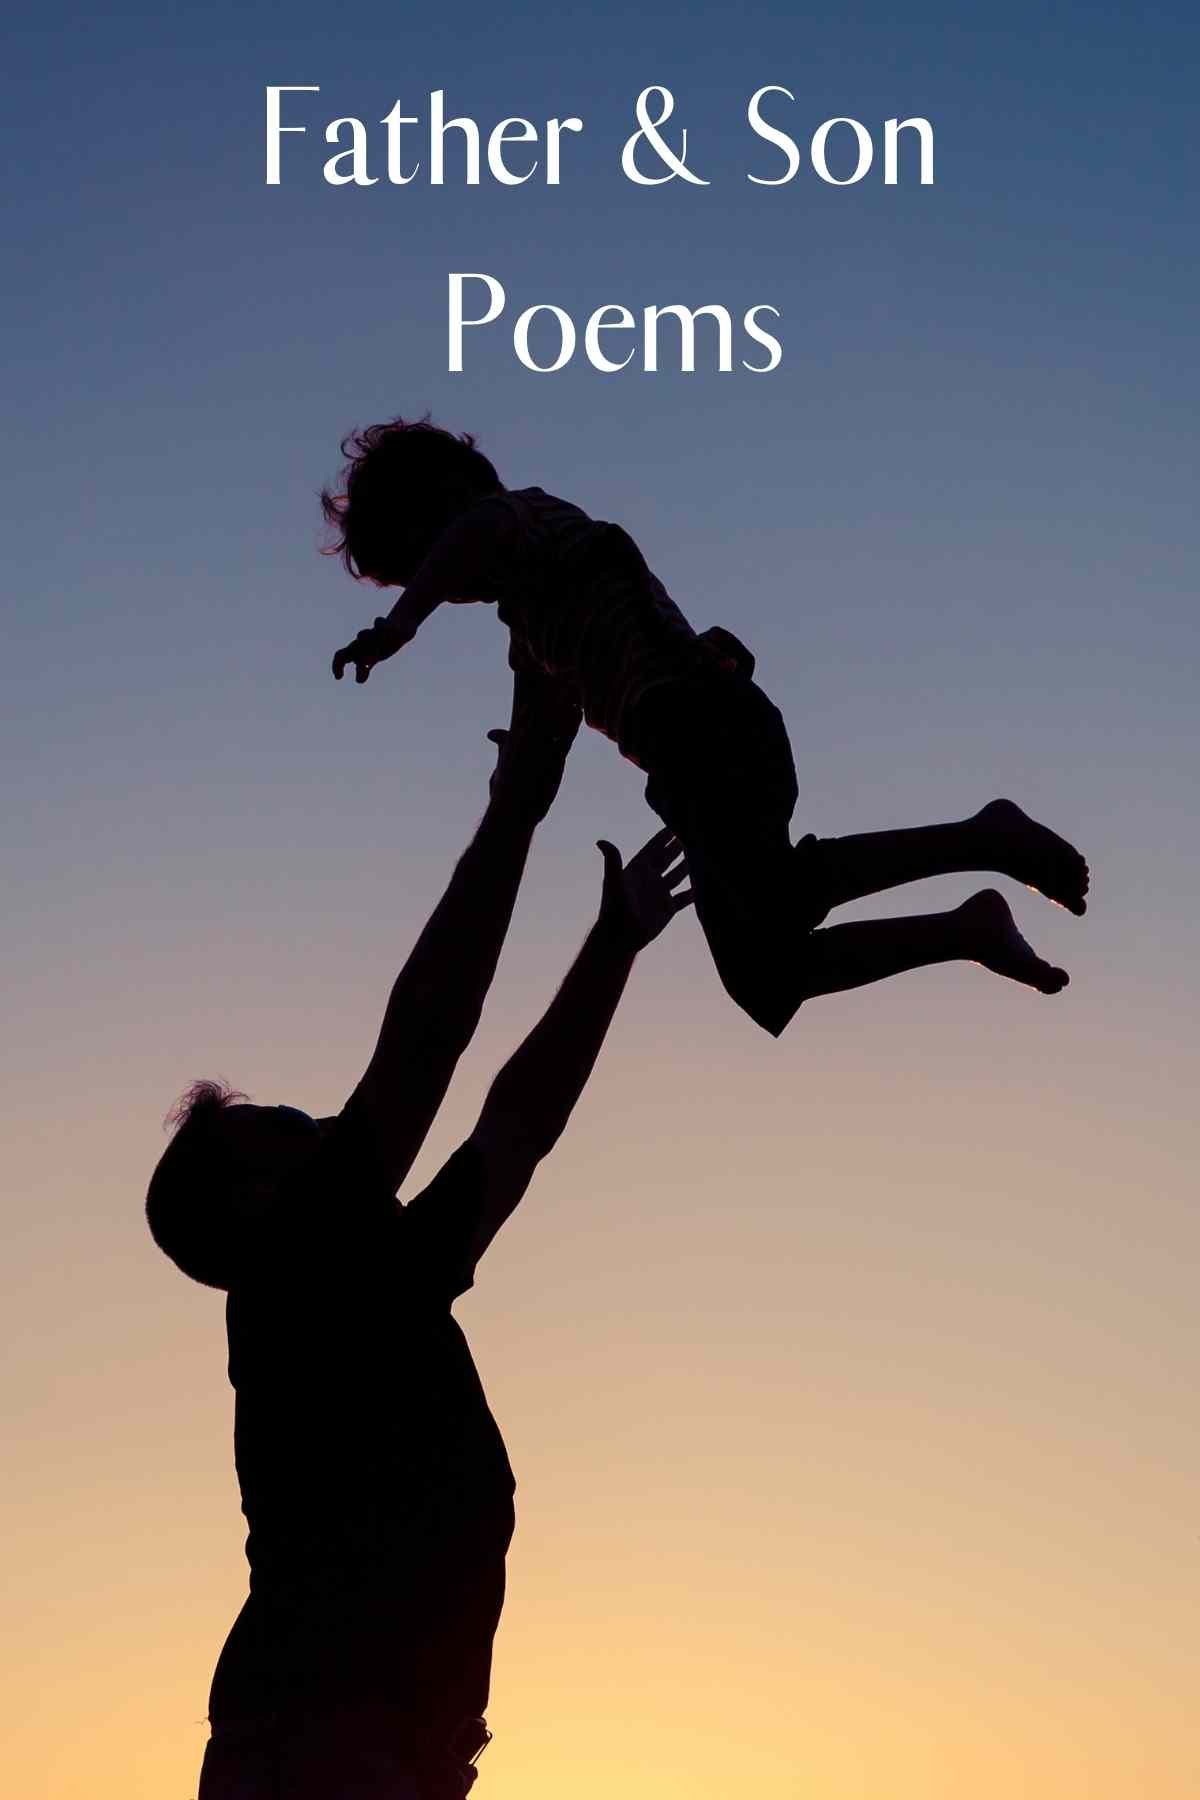 Father & Son Poems